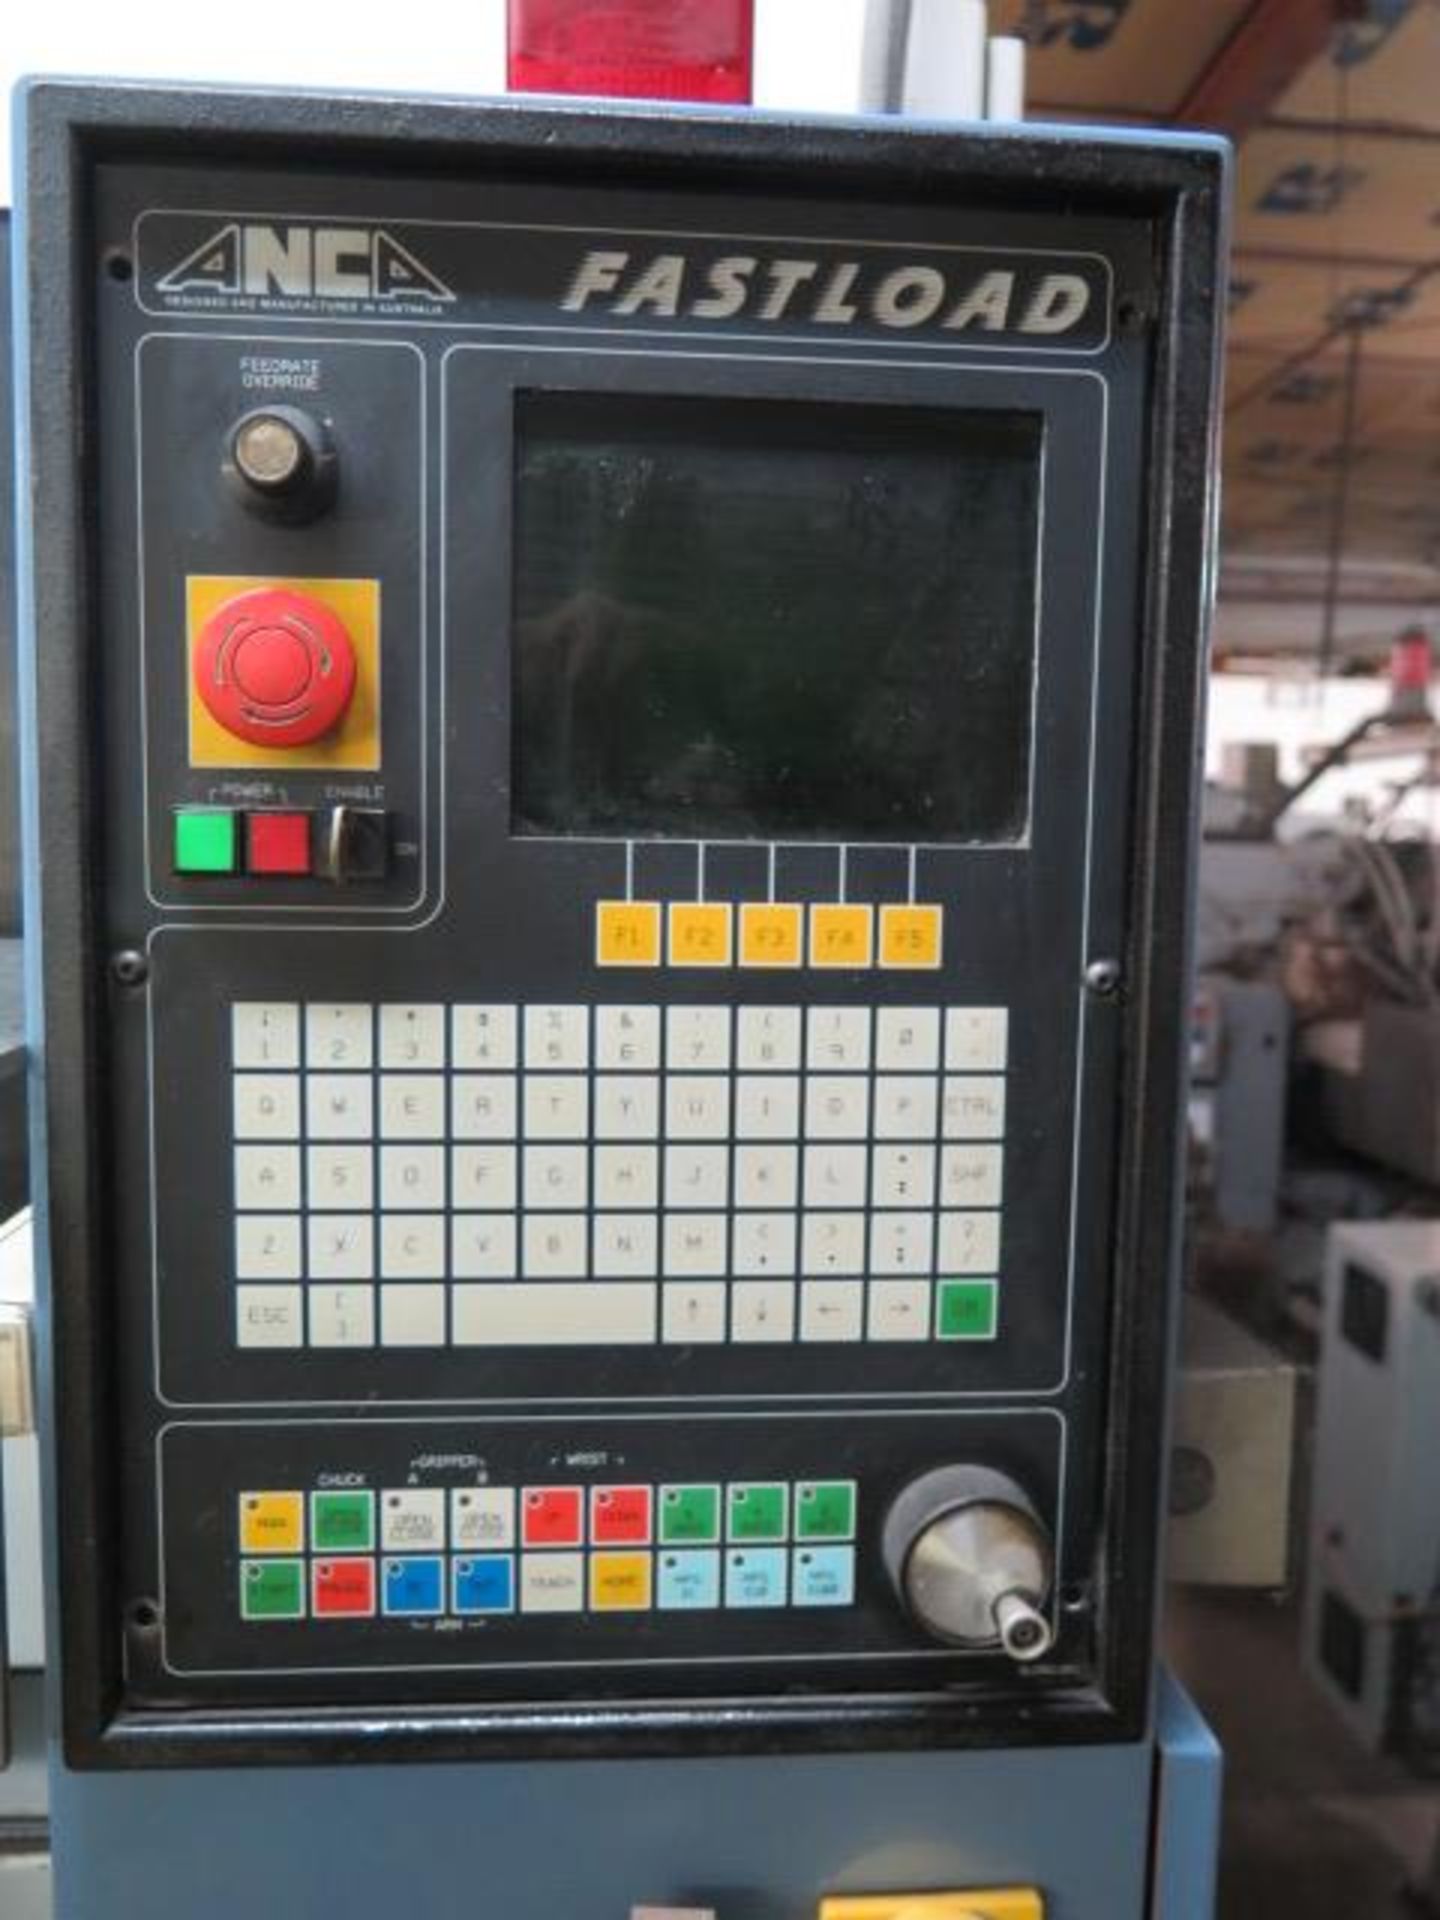 1997 Anca MG7 “Fastgrind” 7-Axis CNC Tool & Cutter Grinder w/ Anca Controls, Steady Rest, SOLD AS IS - Image 18 of 21